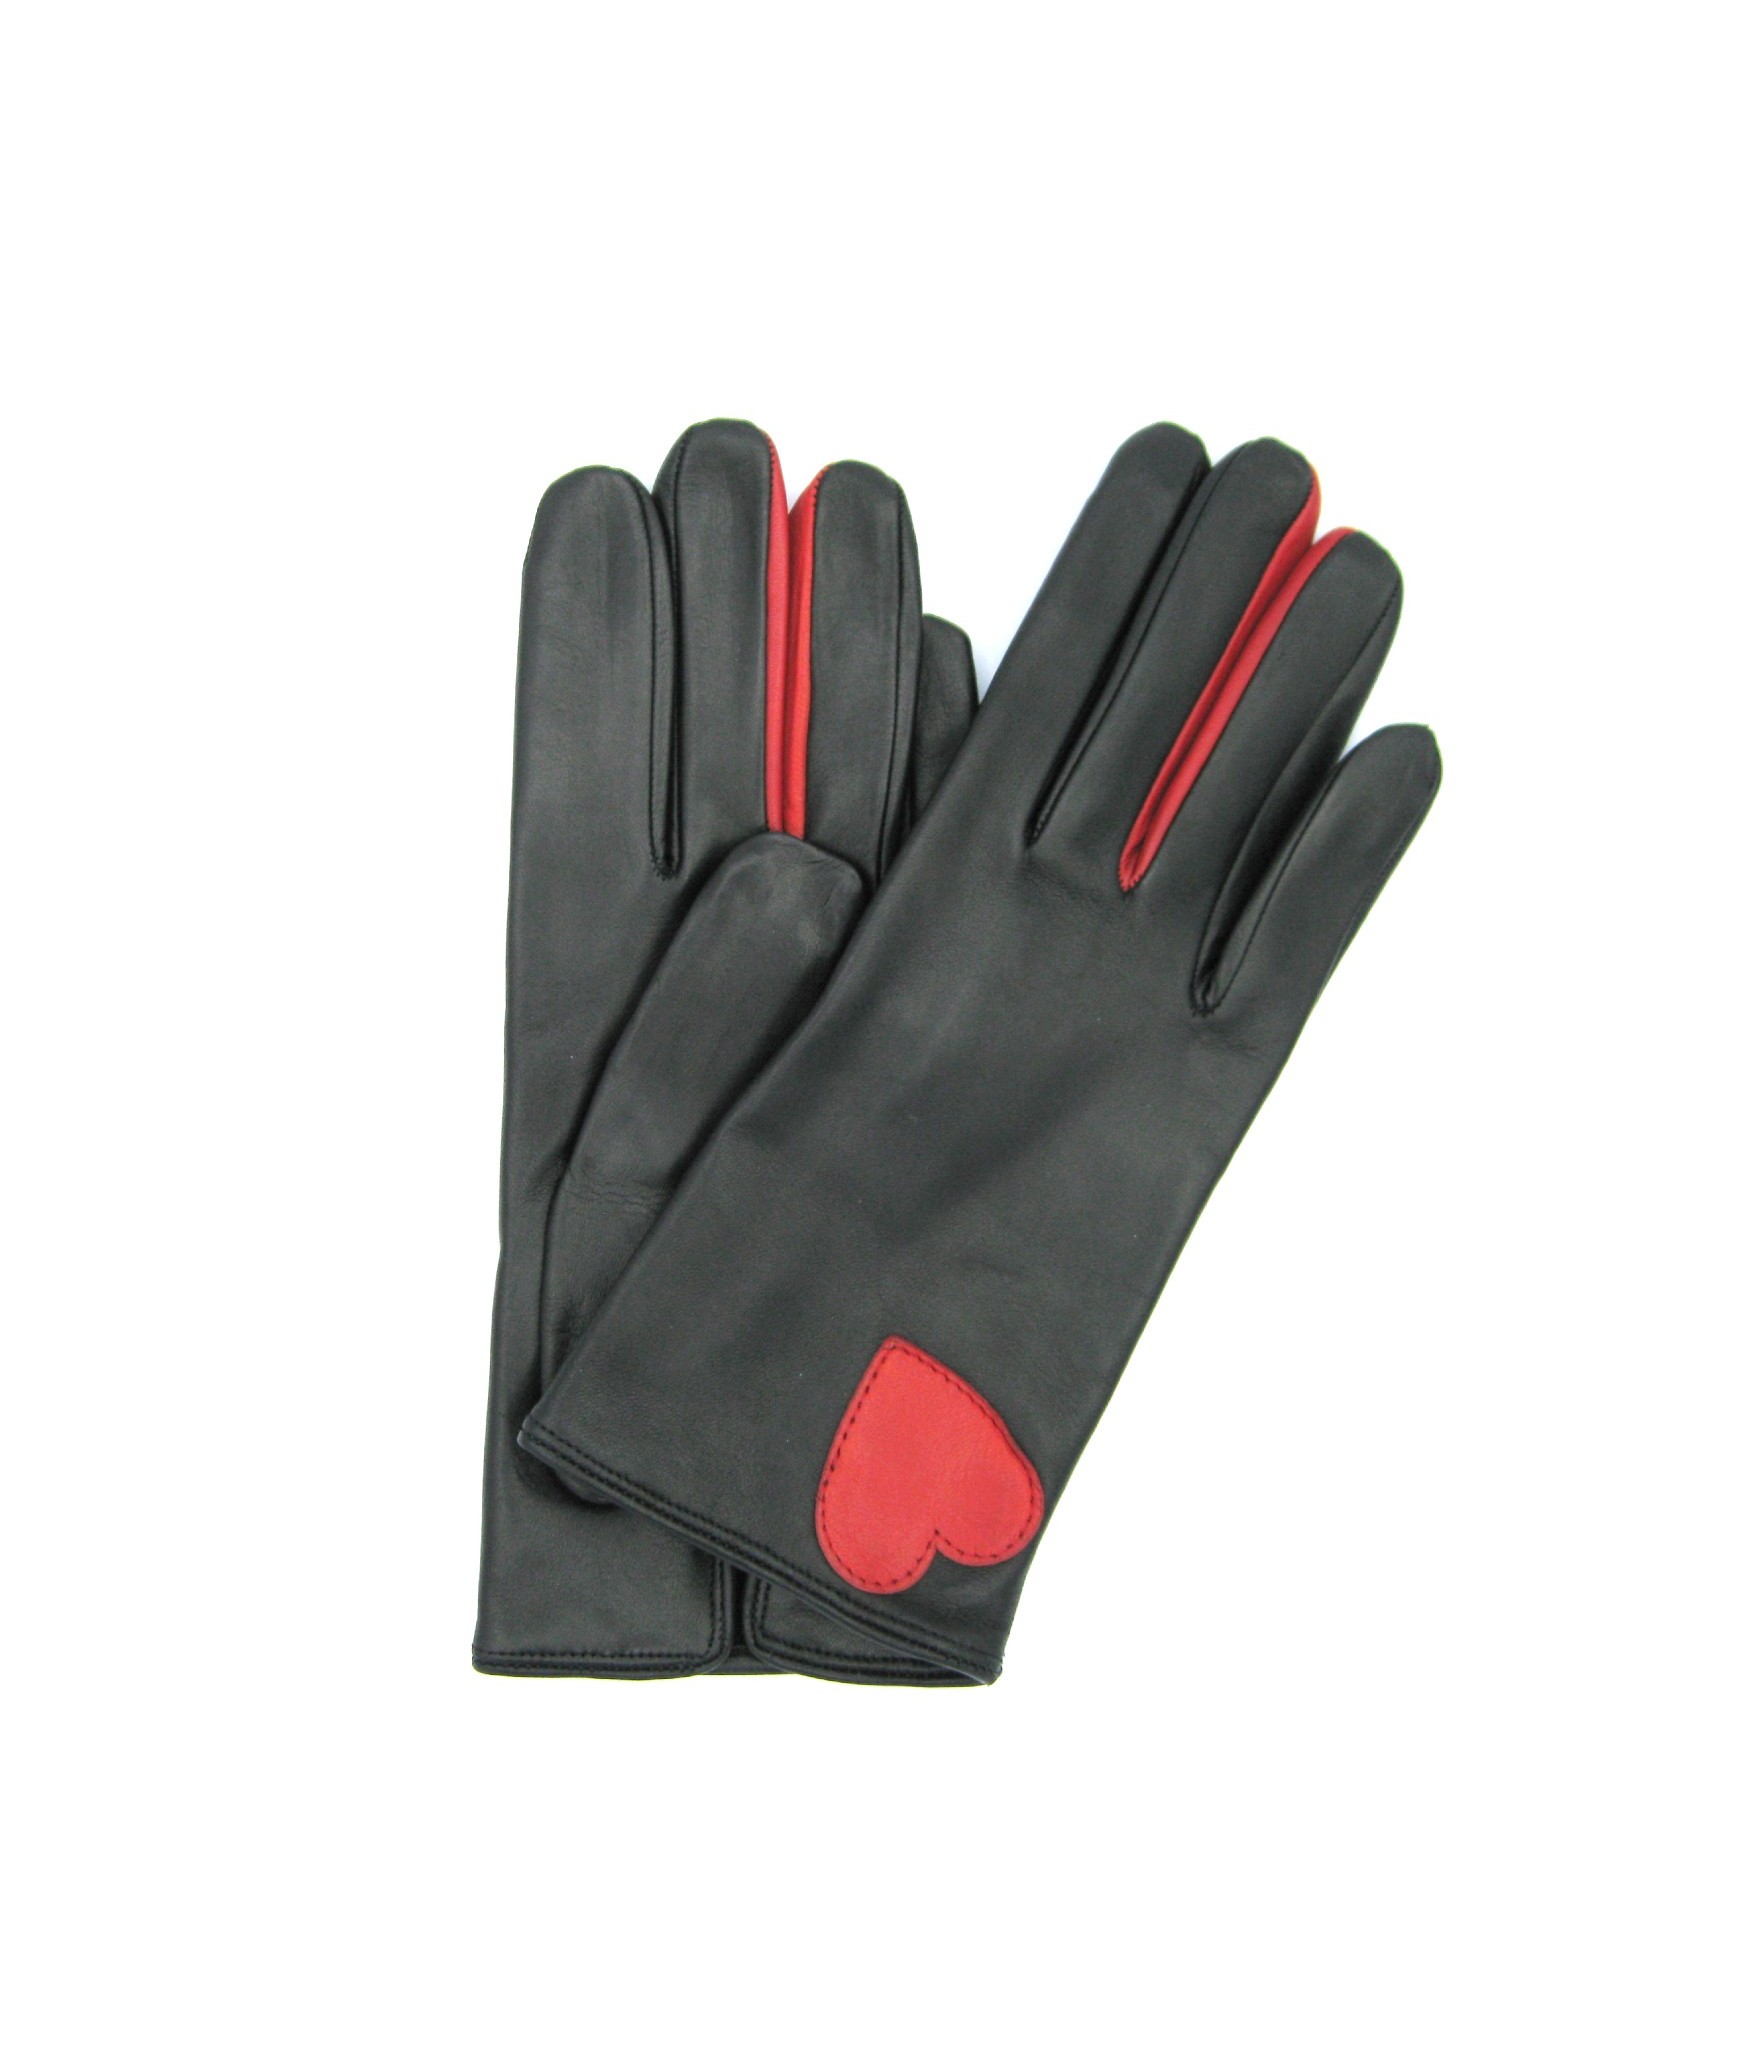 Woman Fashion Gloves Nappa cashmere lined with Black / Red